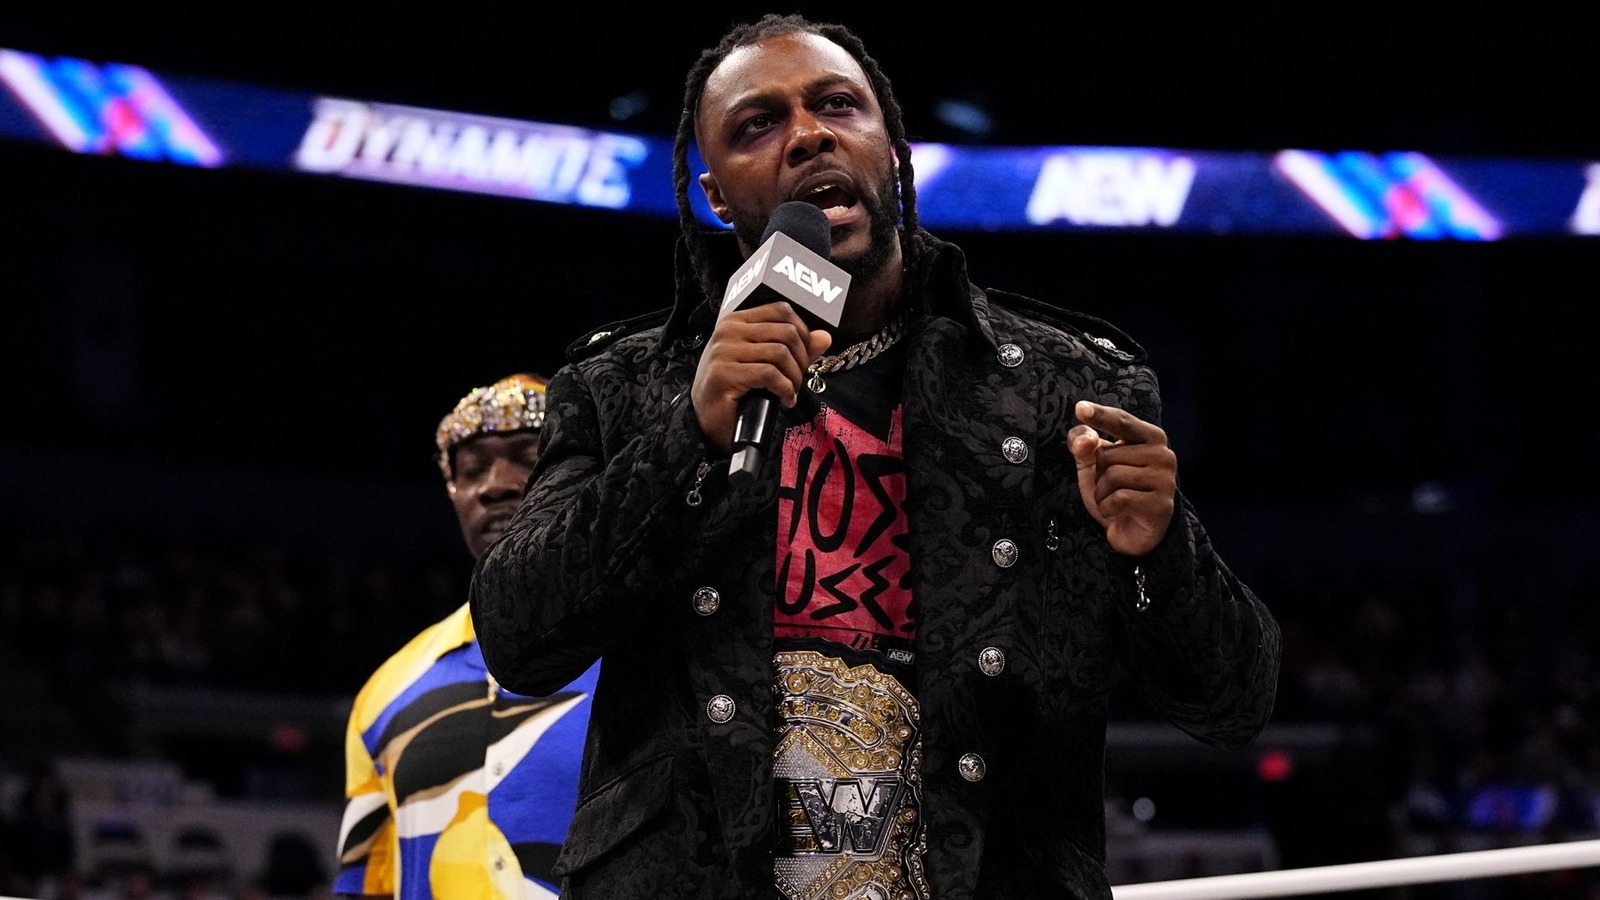 AEW Champ Swerve Strickland Sees 'Ghost Of My Past' In Christian Cage Feud